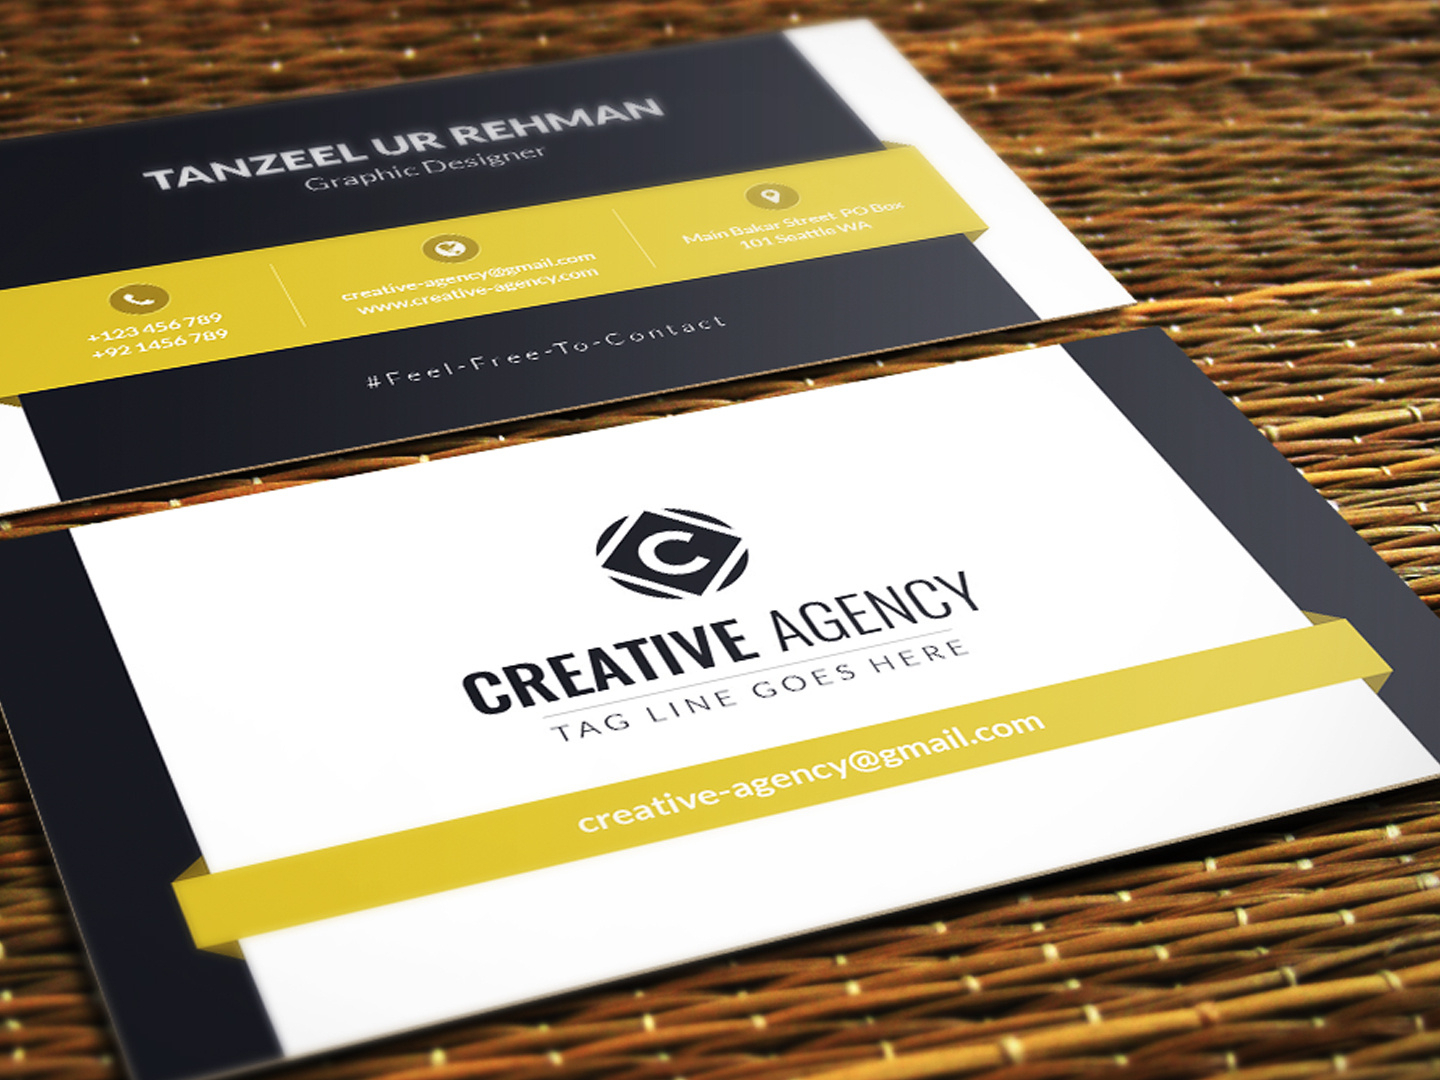 Business Cards Template – Free Downloadtanzeel Ur Rehman For Download Visiting Card Templates